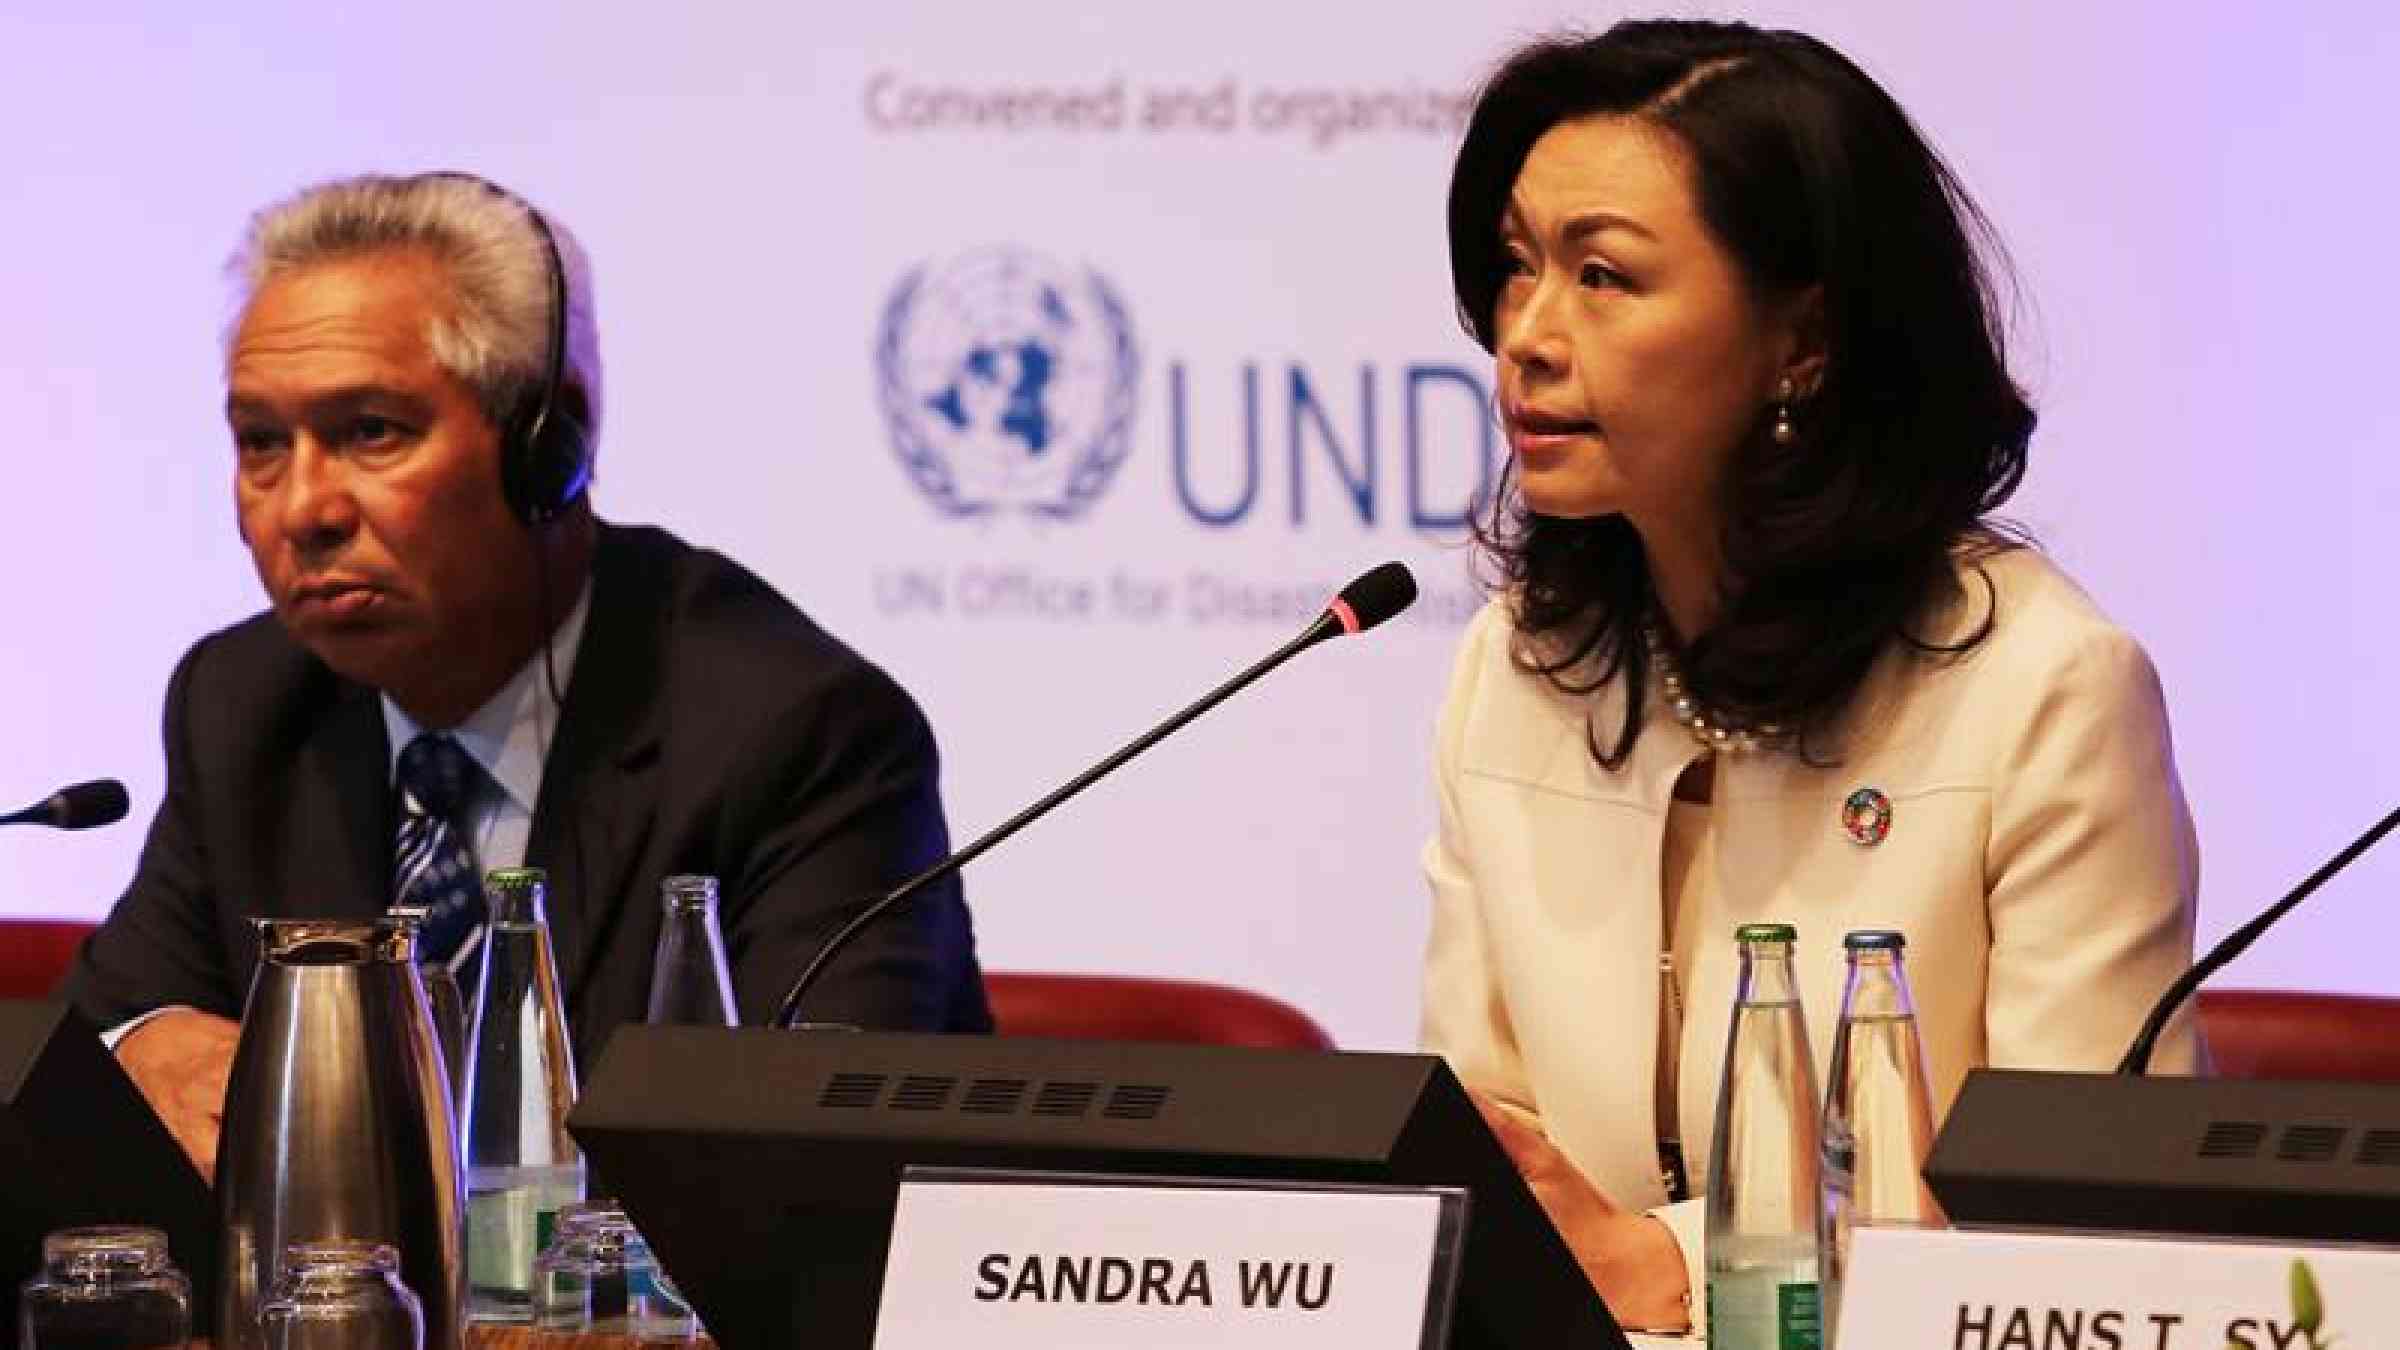 Panelists at the High-Level Dialogue on risk-informed public and private investment: Isidoro Santana, Minister of Economy, Planning and Development, Dominican Republic and Sandra Wu, UN Global Compact